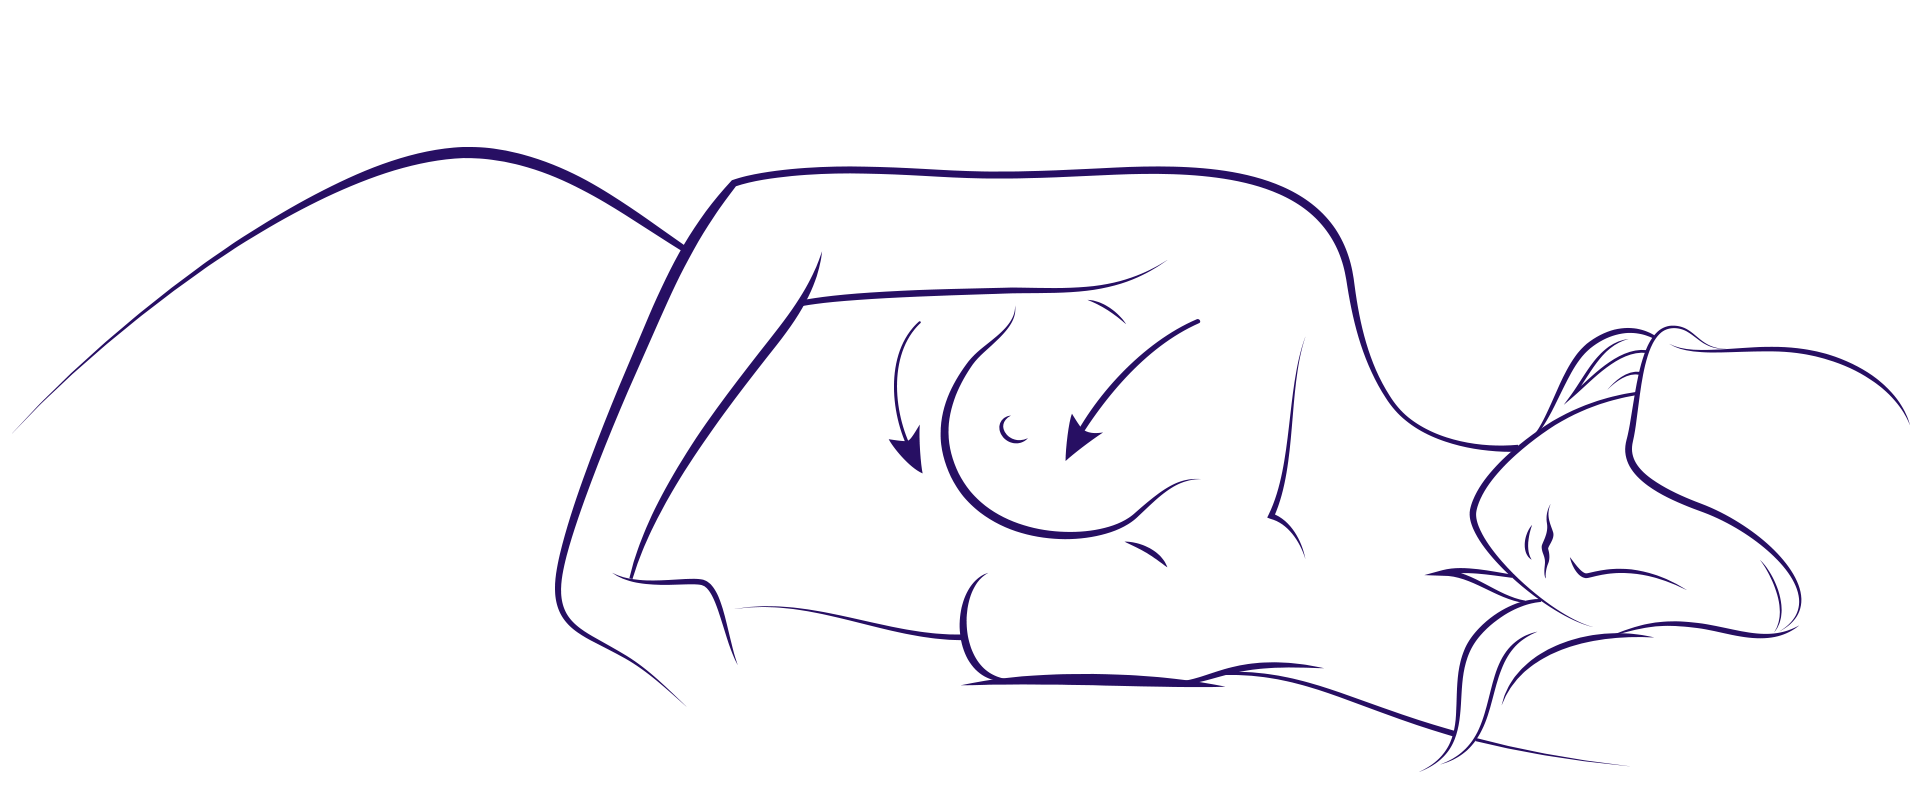 drawing of woman sleeping on her side illustration the use of an anti-wrinkle bra